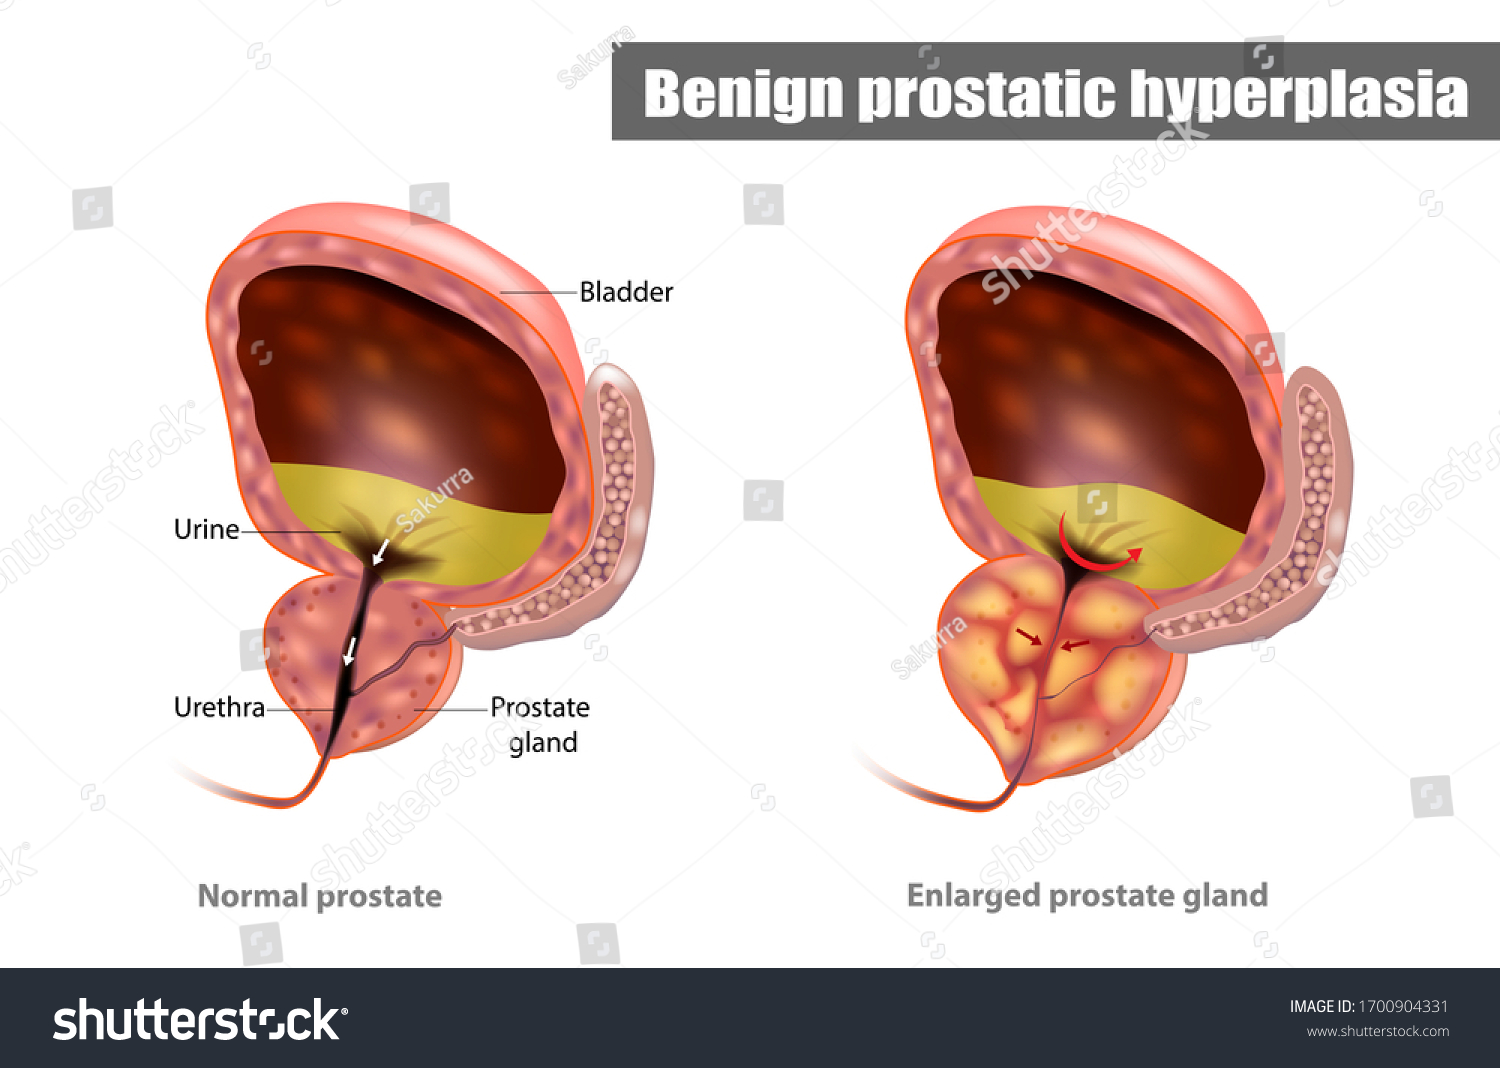 how to reduce prostate enlargement naturally